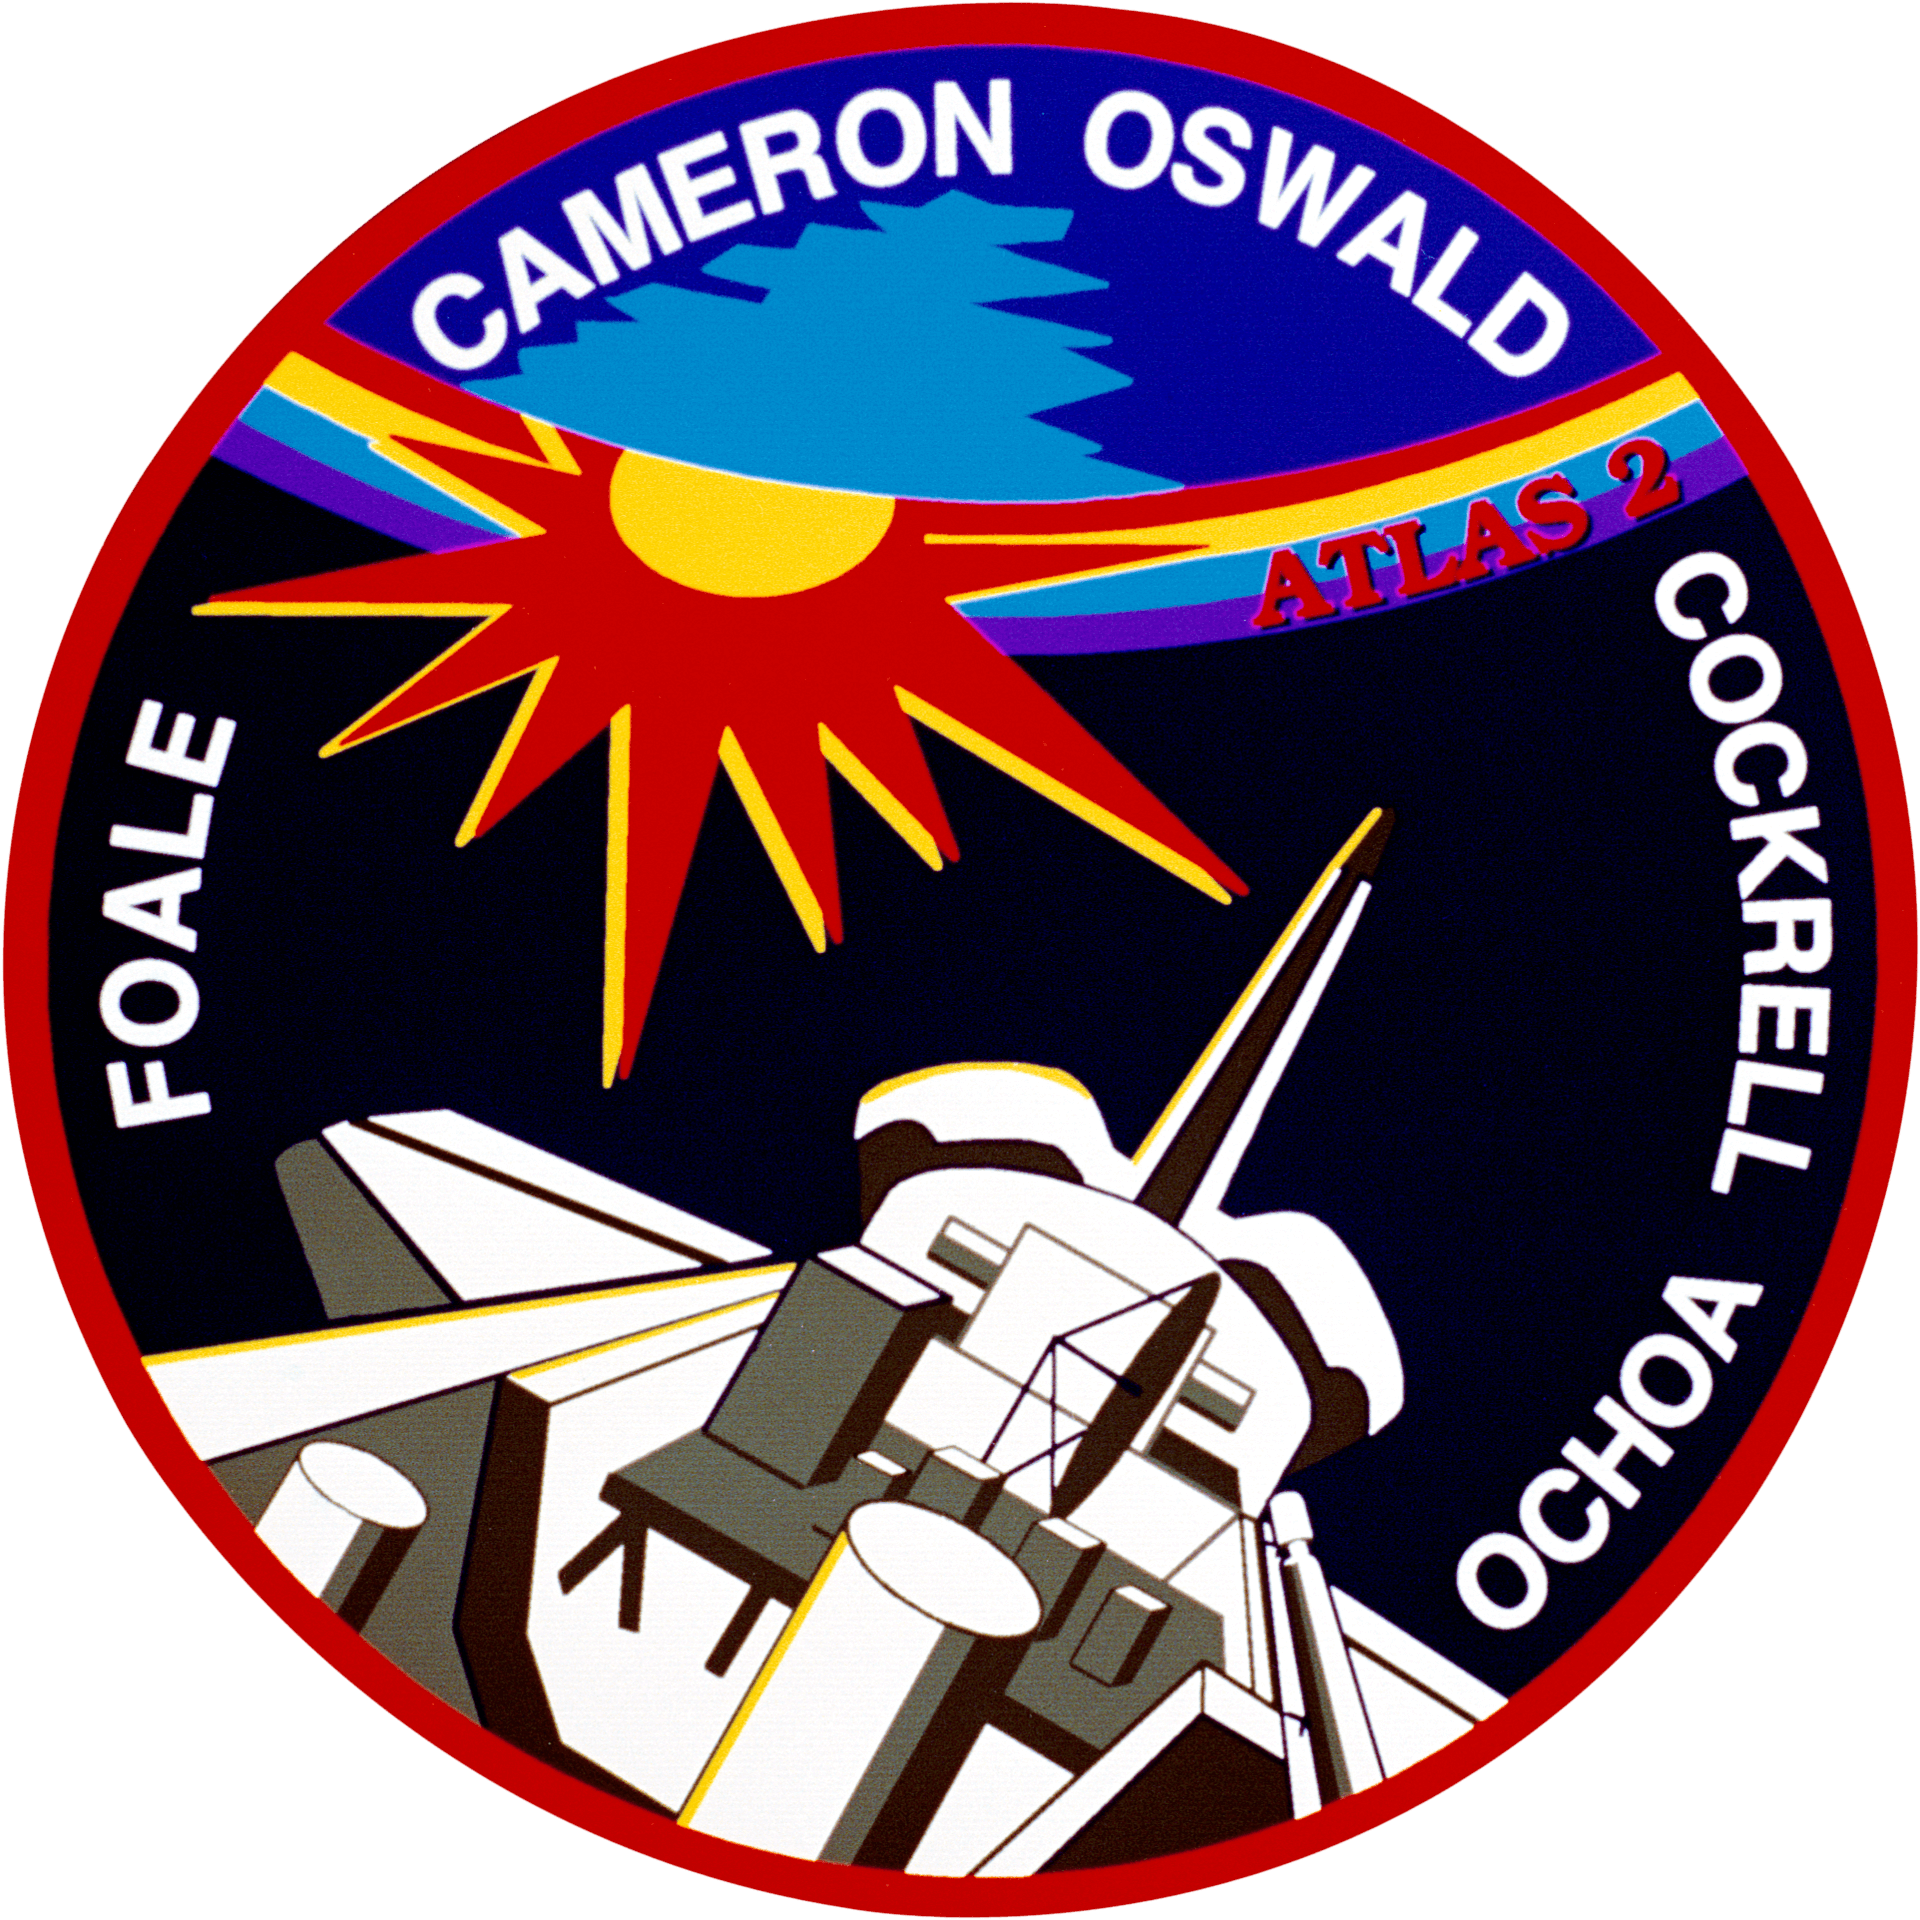 Mission patch for STS-56